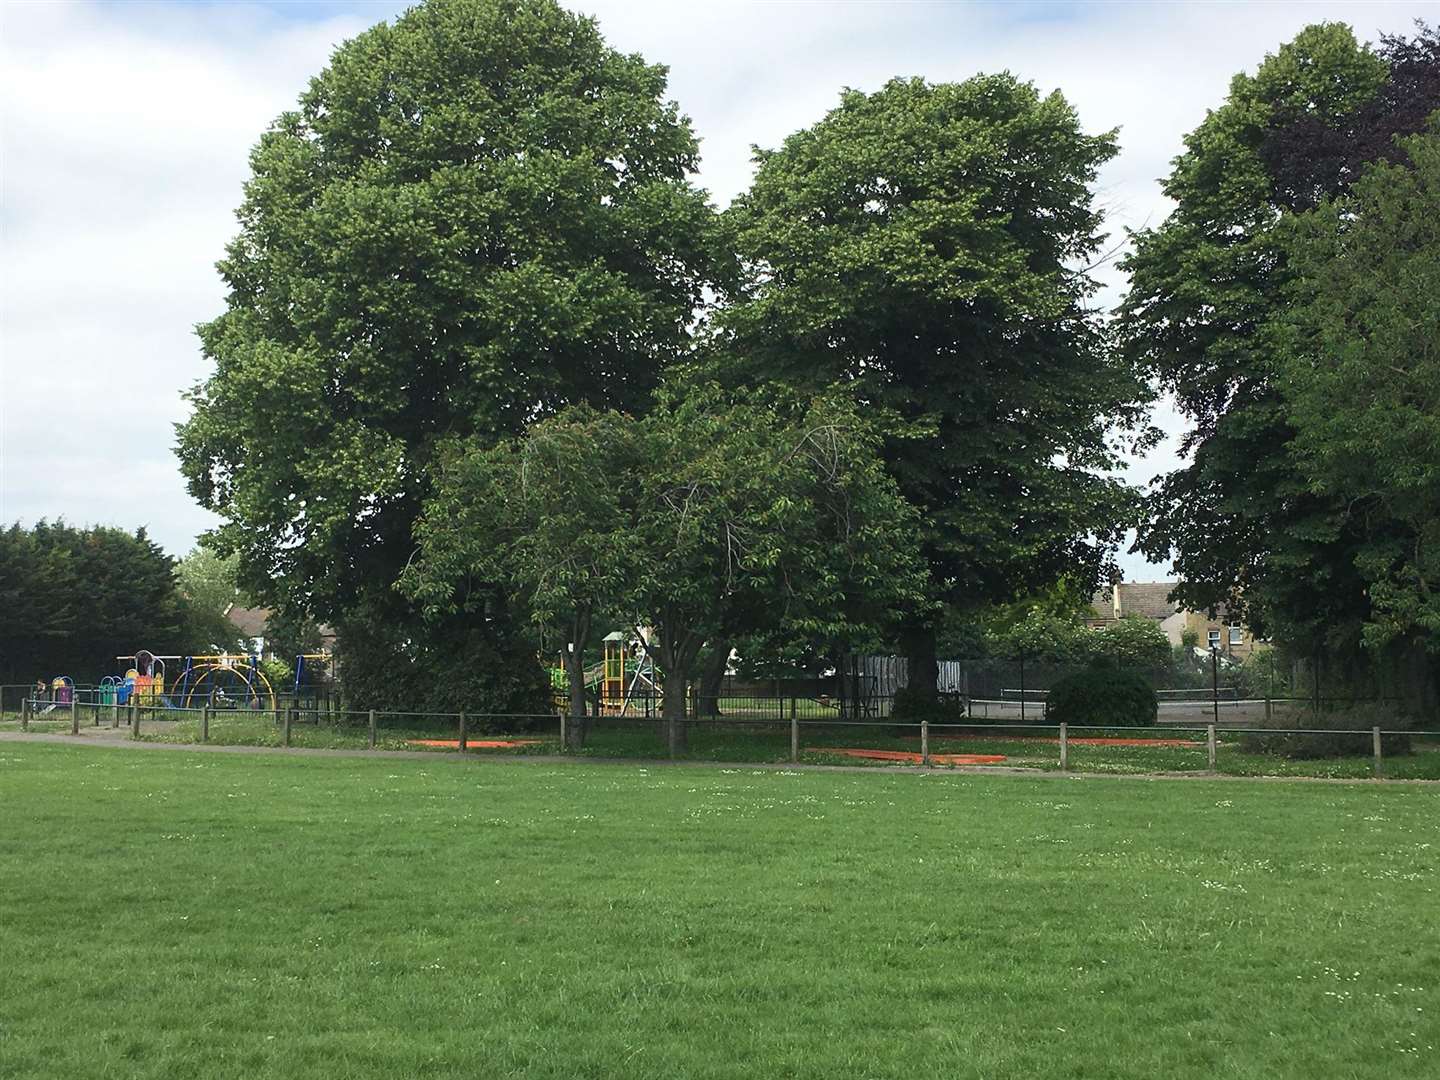 Woodlands Park, Gravesend, where the incident took place